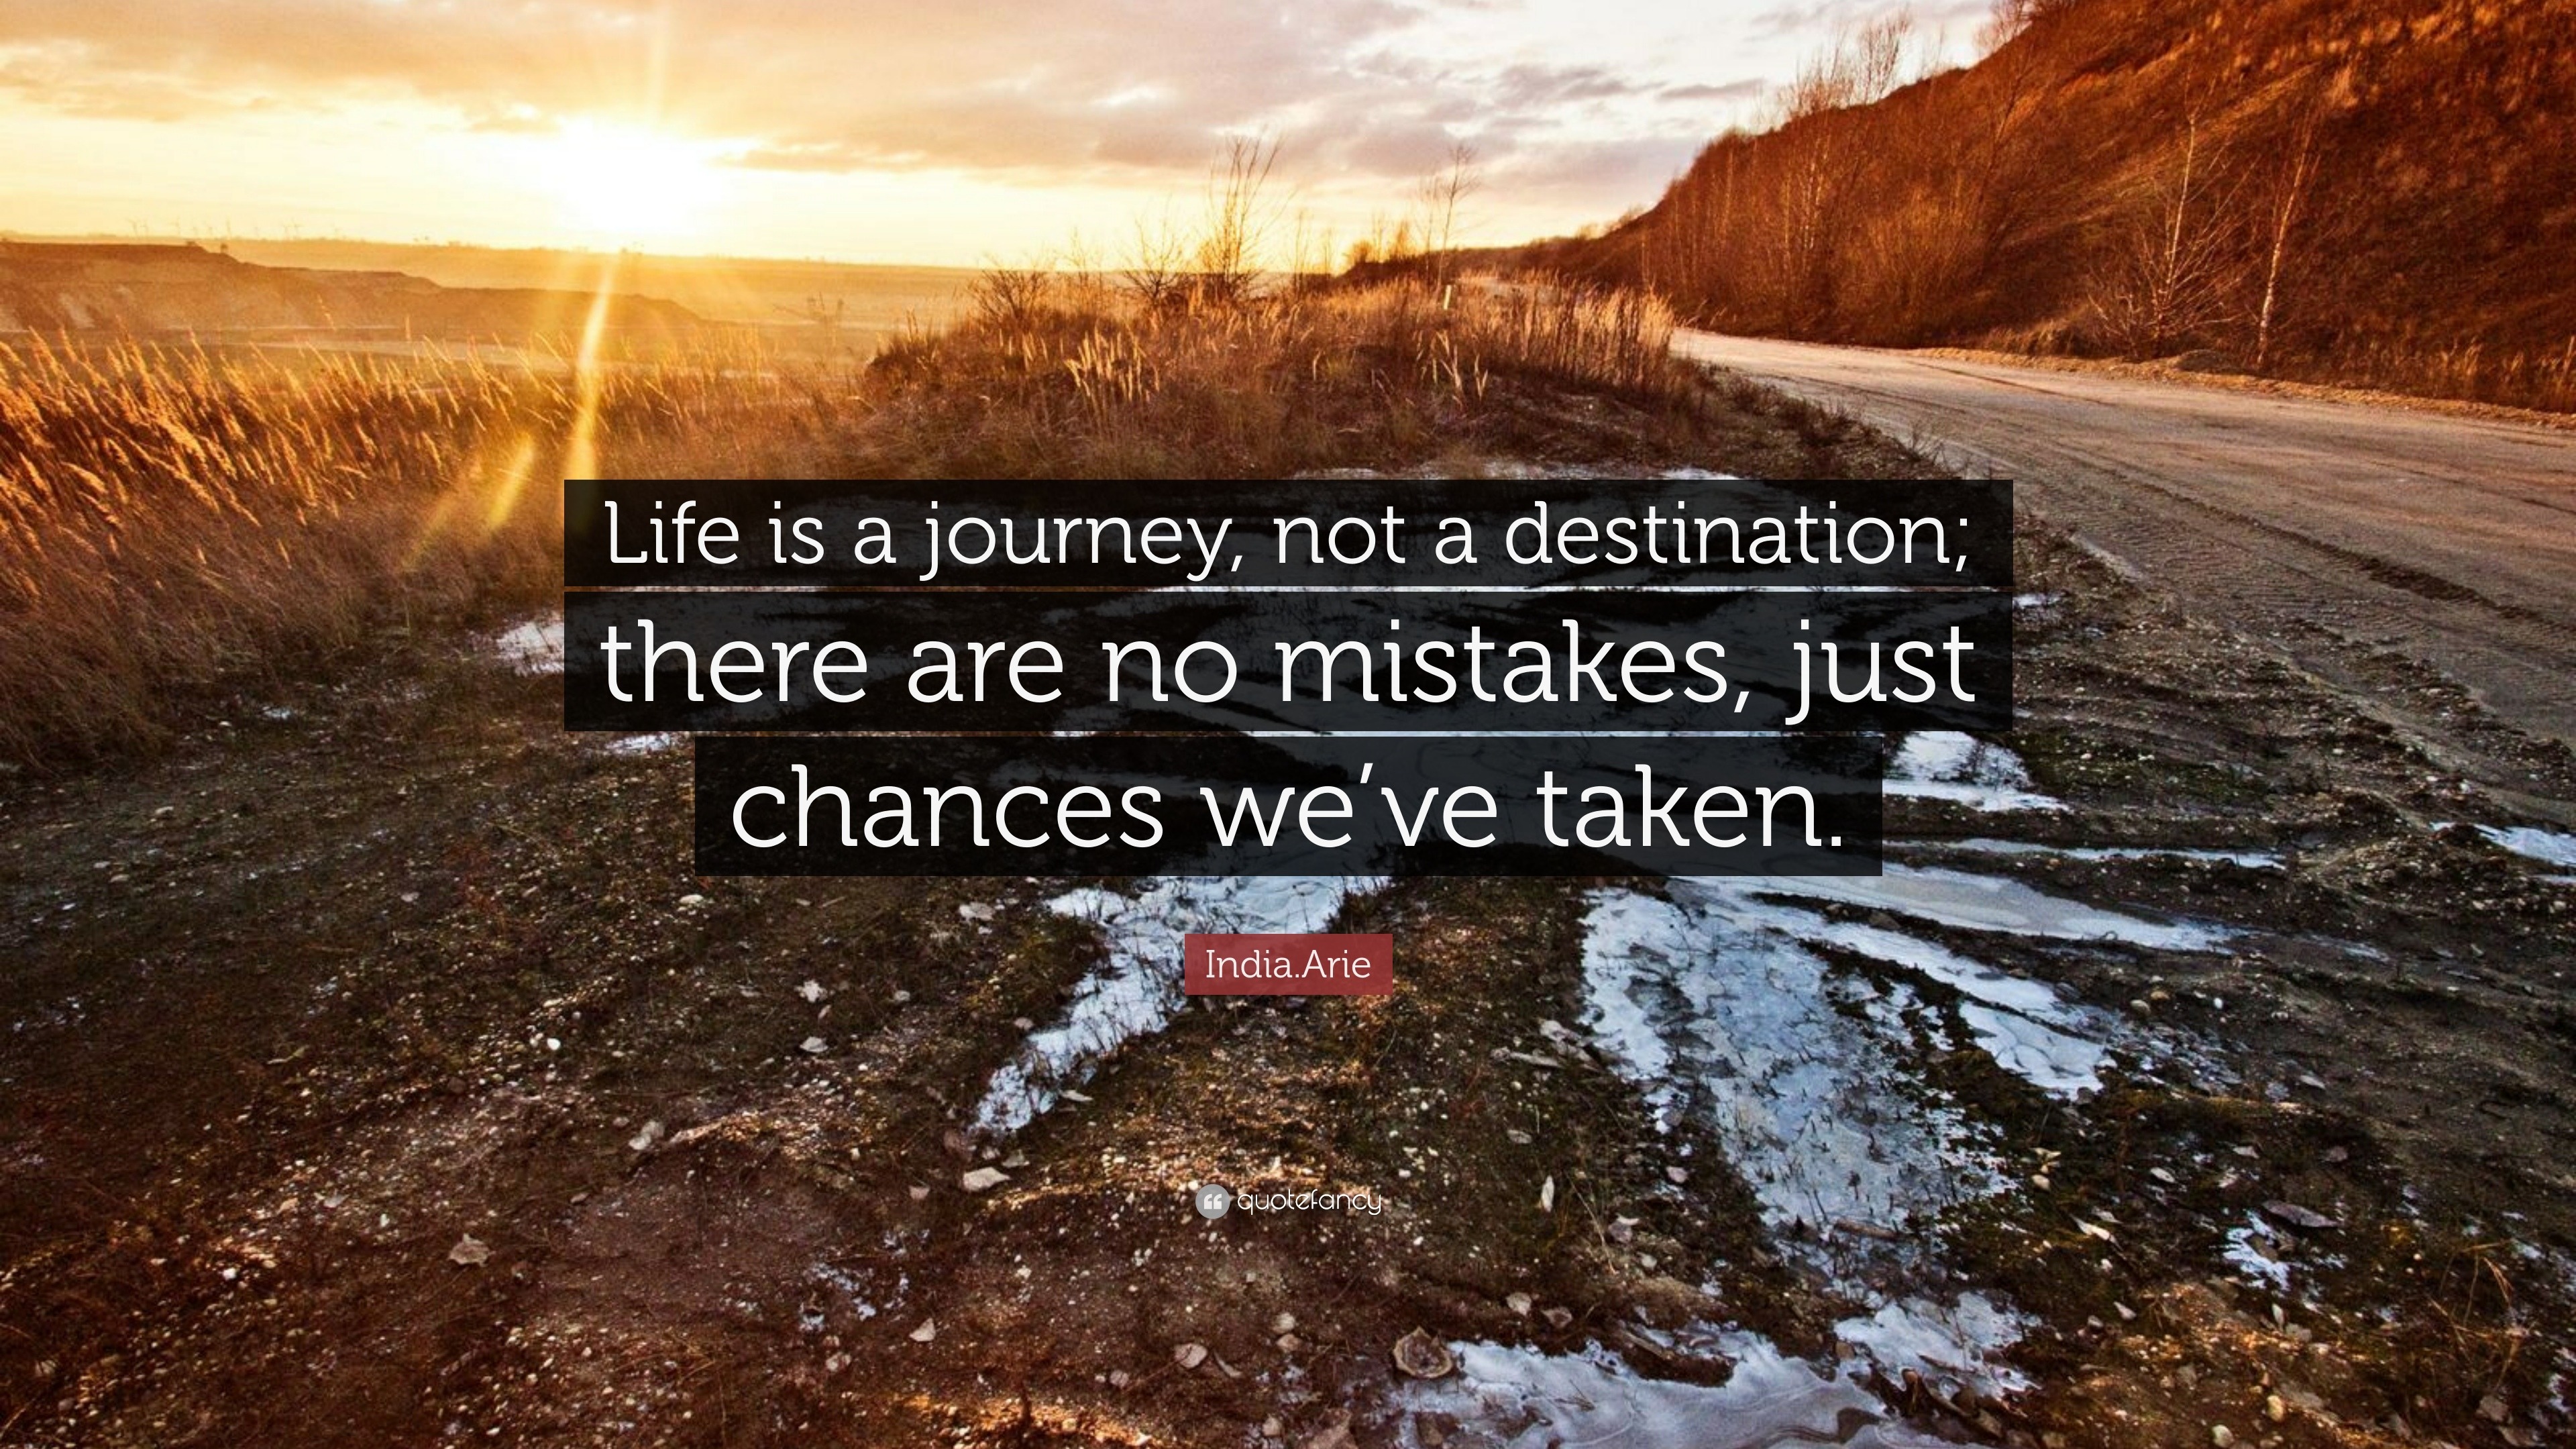 Arie Quote “Life is a journey not a destination there